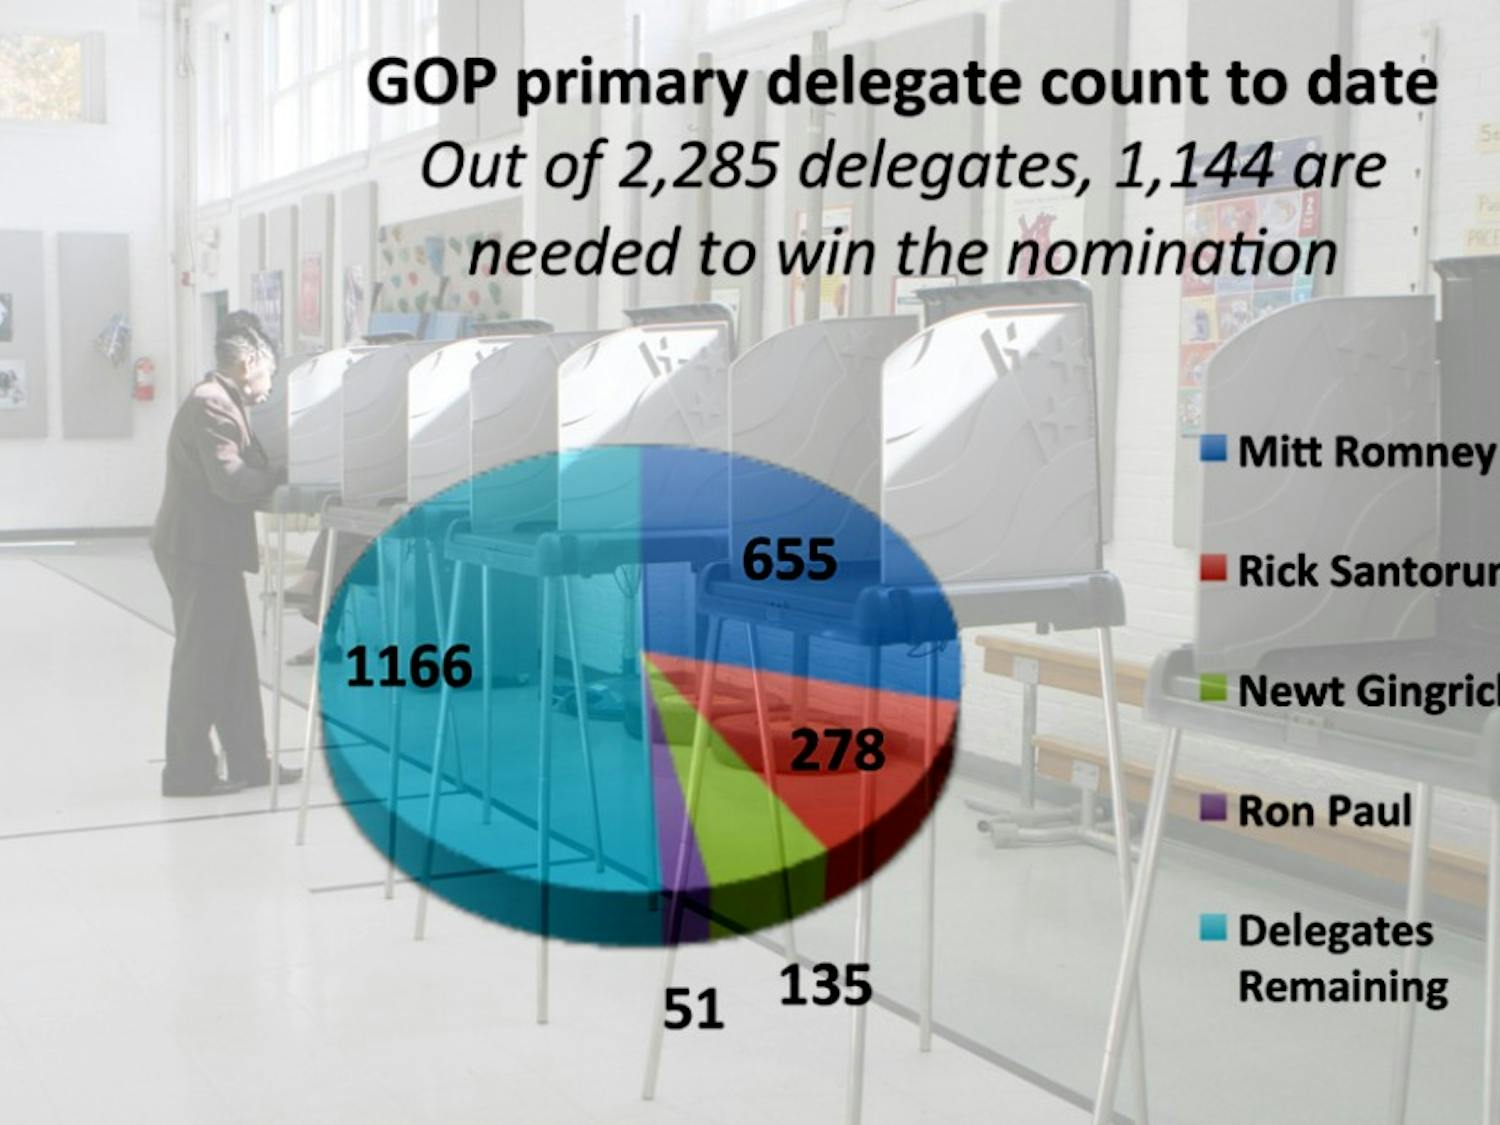 In winning Tuesday’s primaries in Maryland, Washington, D.C. and Wisconsin, Romney gained 76 delegates.